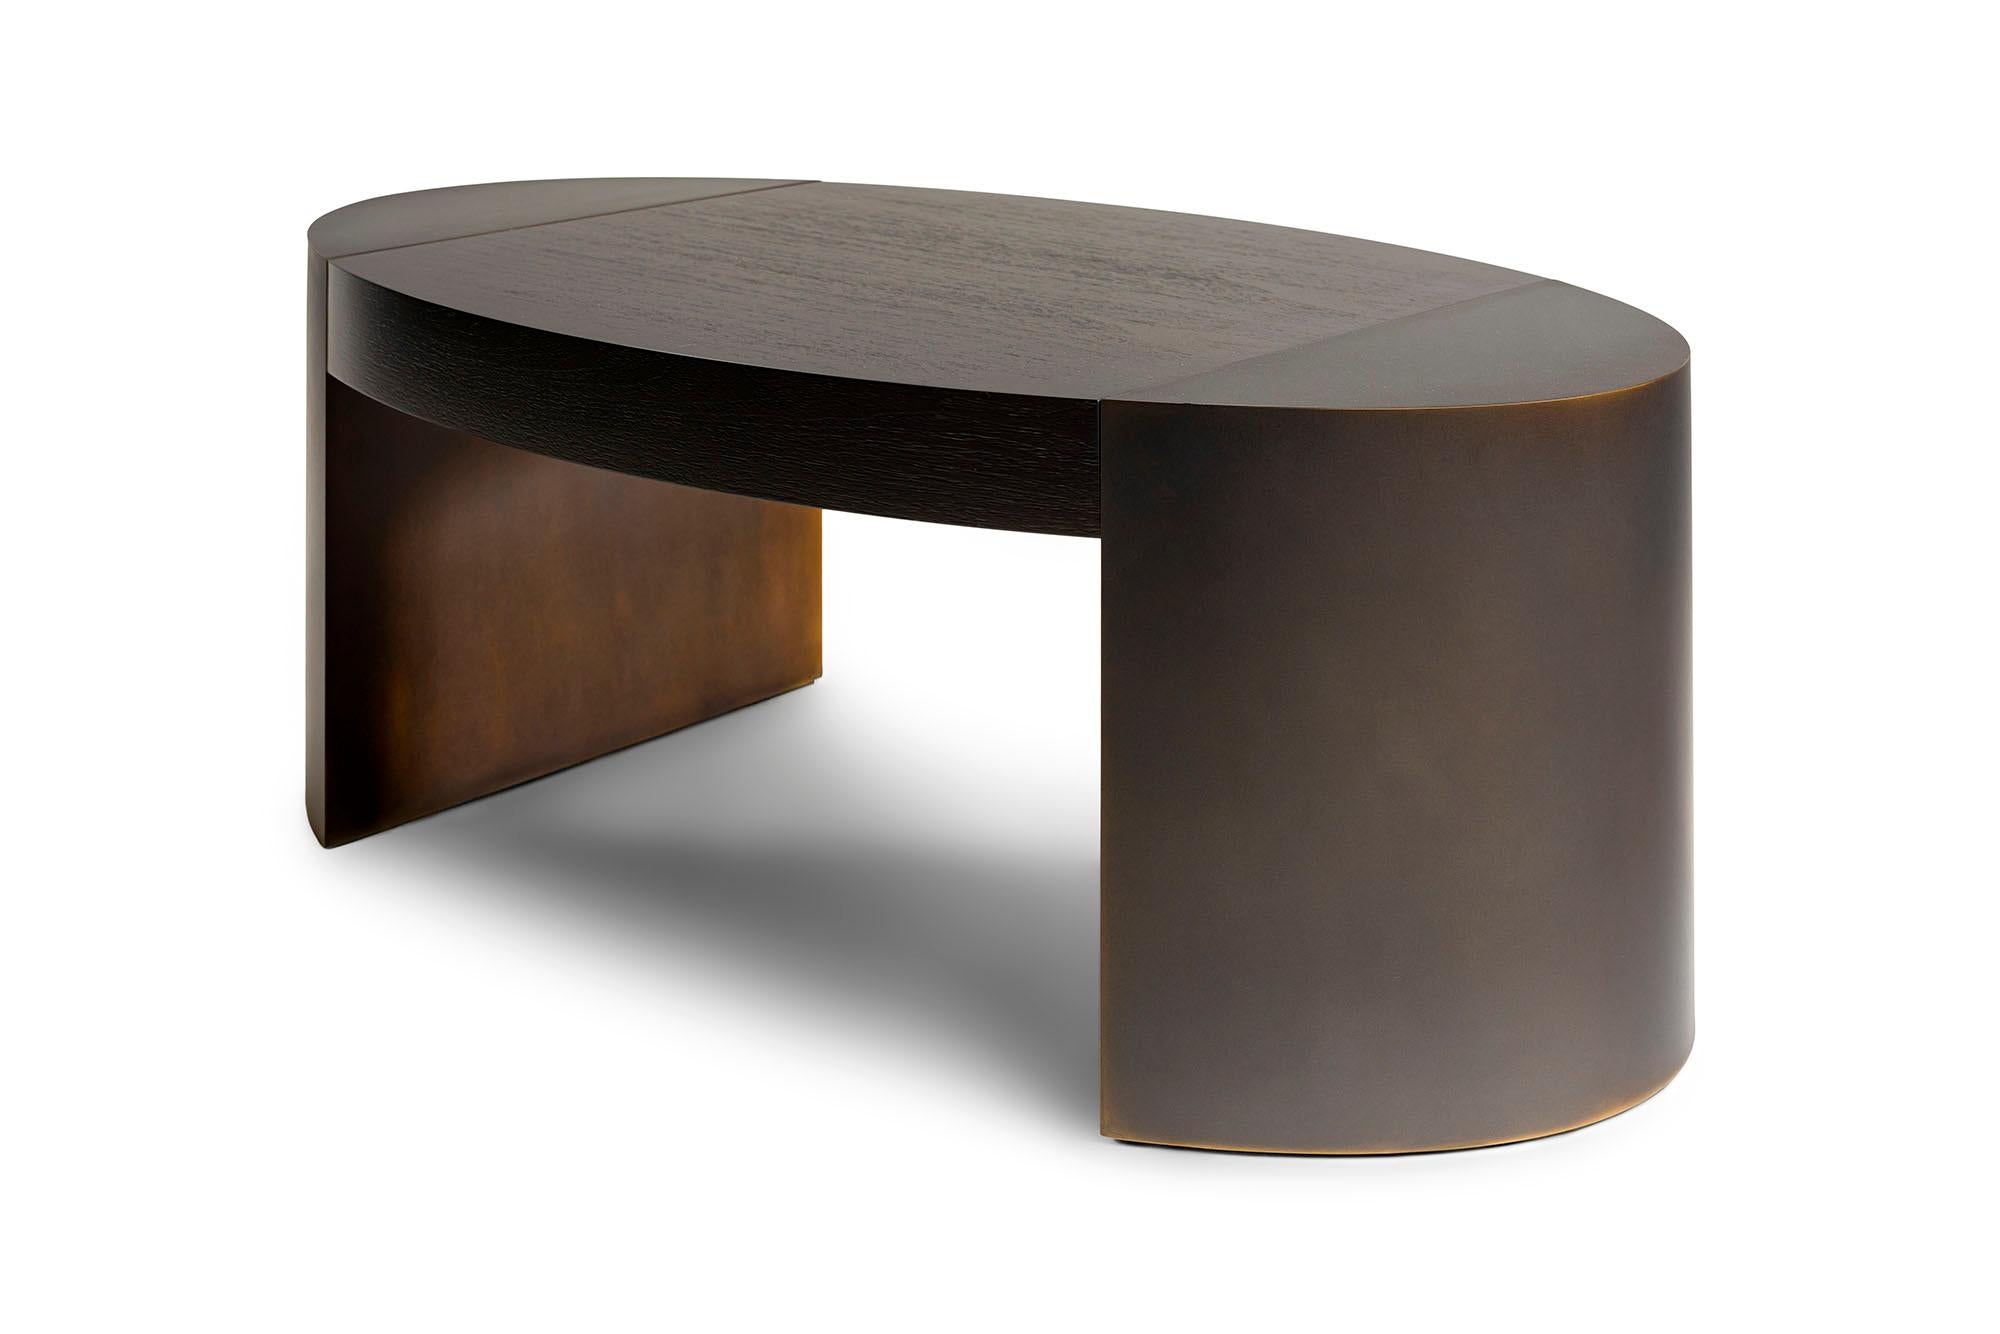 The LUMA Design Workshop Silo coffee table is the result of thoughtful design and expert craftsmanship. A Truffle Walnut top is held between two dark bronze finished ends to create the ellipse shape which gives this table its character.

Like all